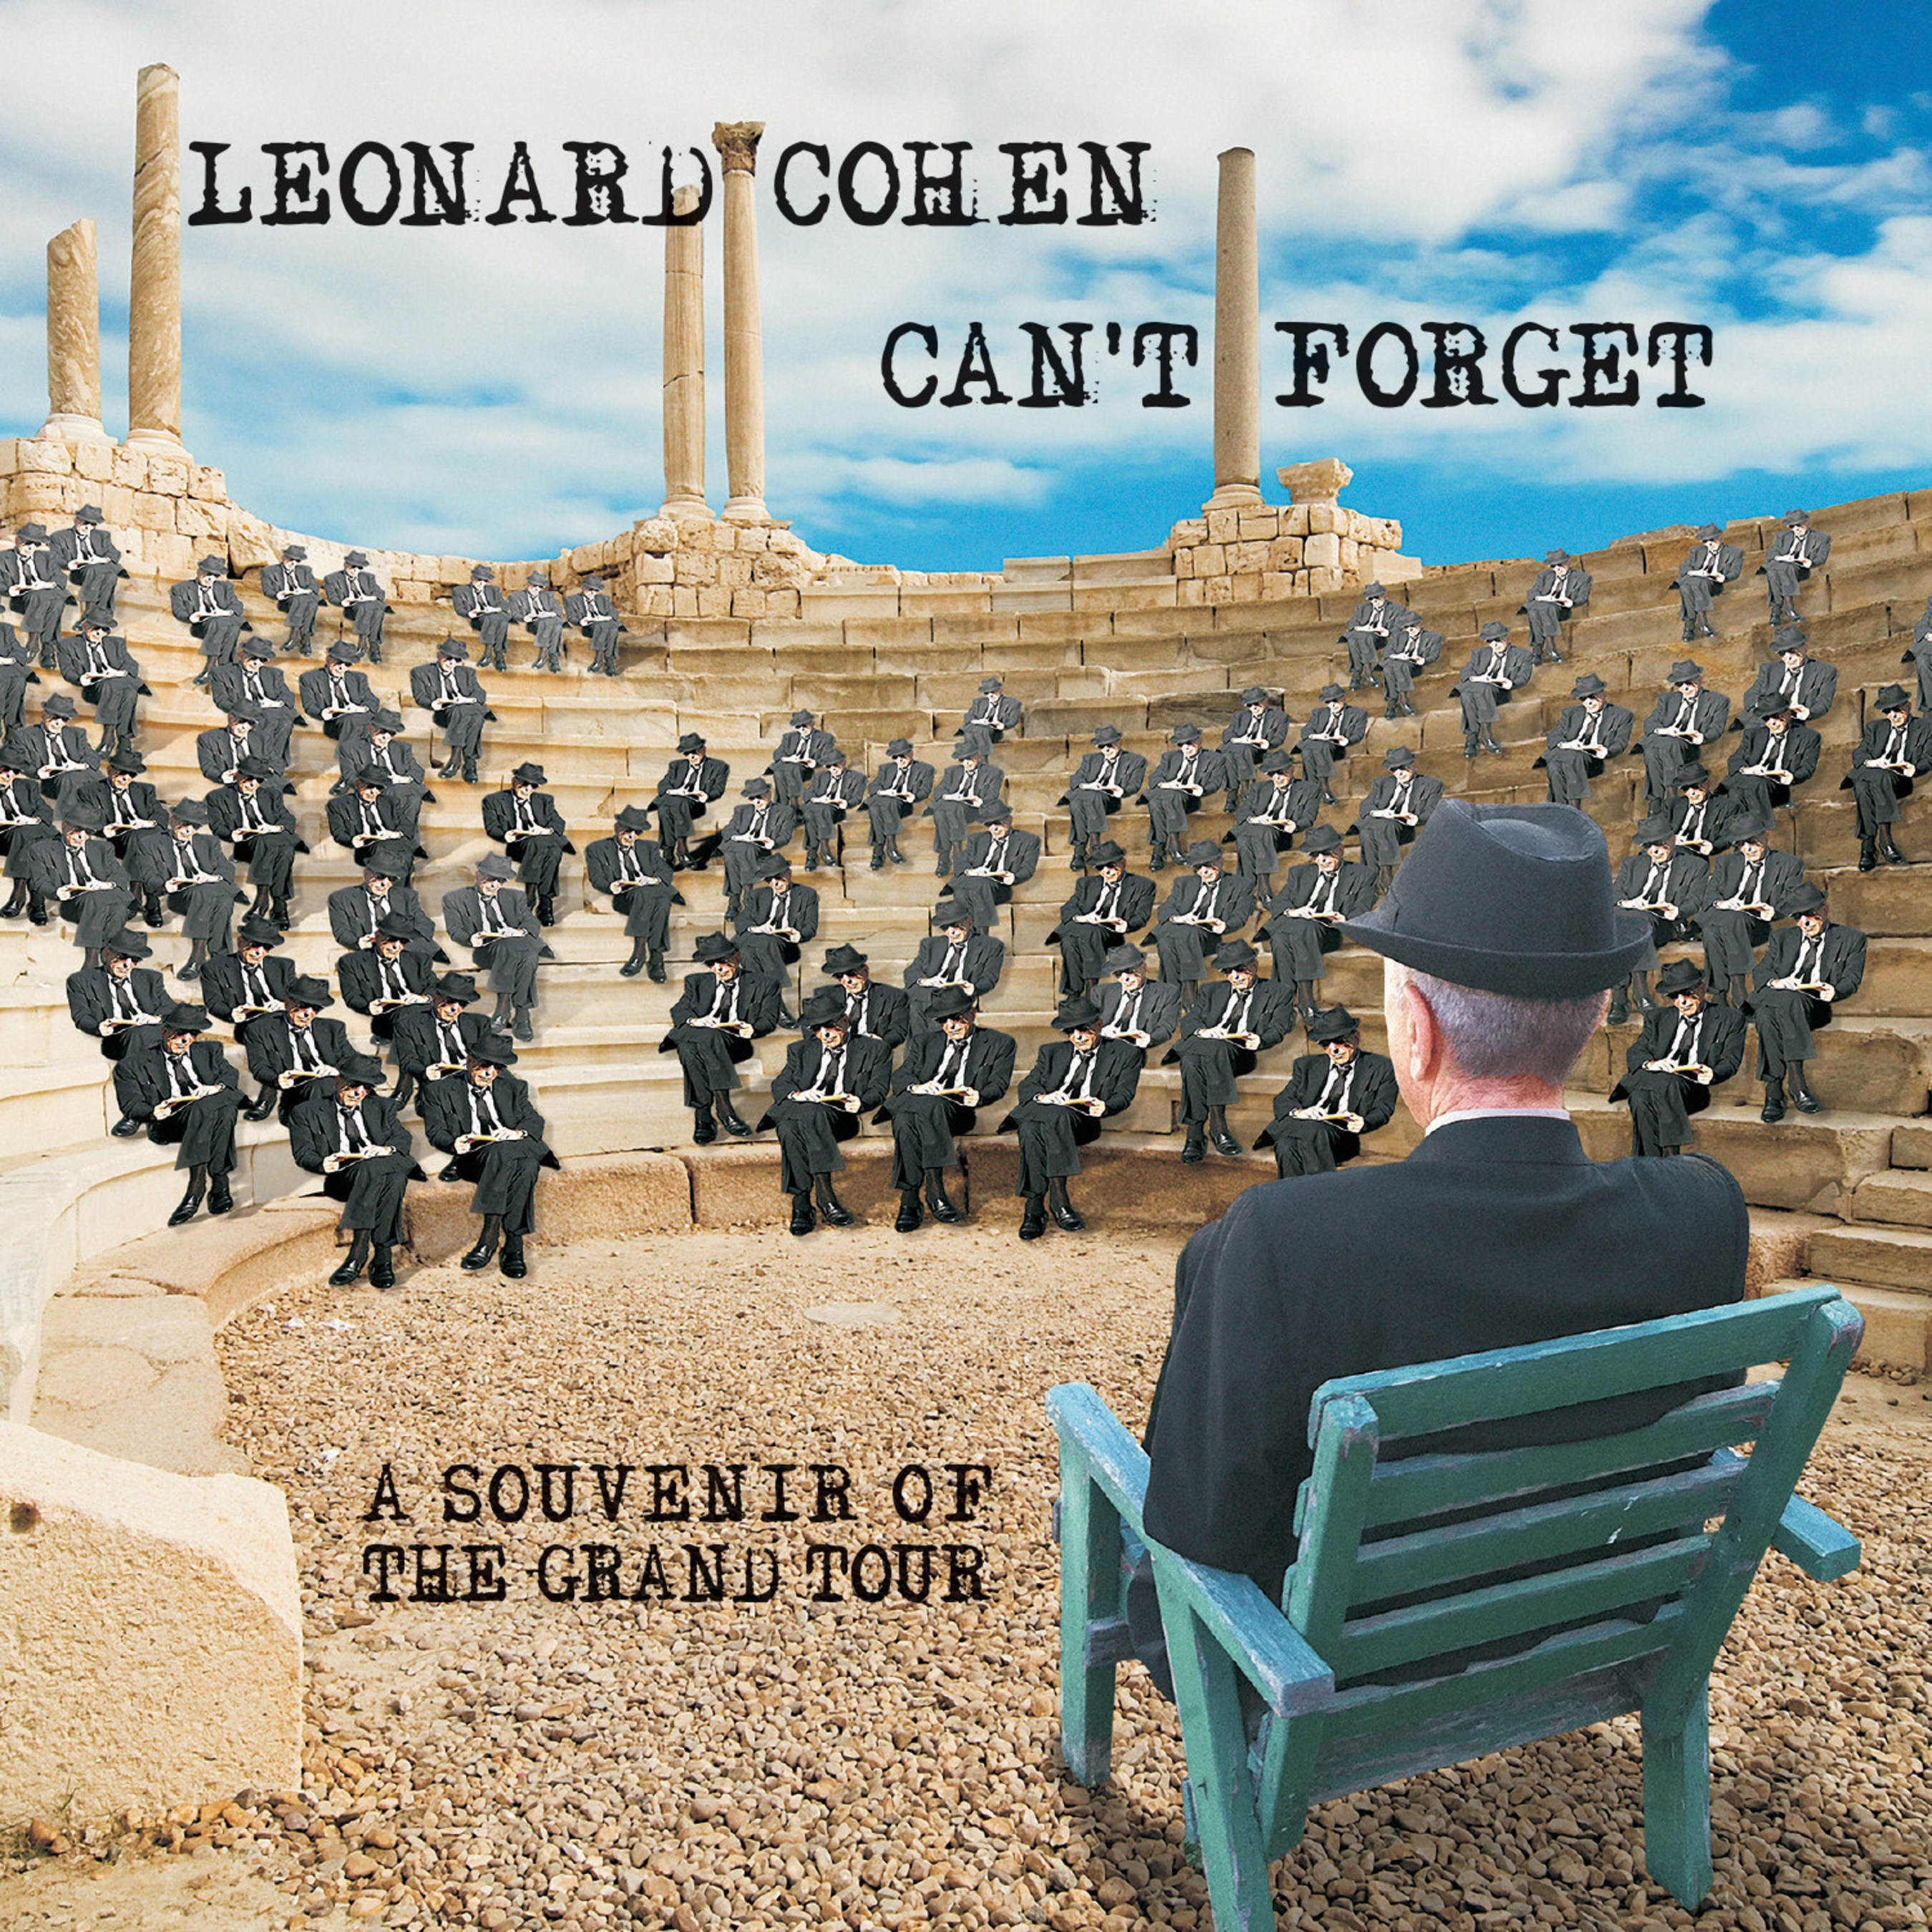 Leonard Cohen releases Can't Forget: A Souvenir of the Grand Tour on May 12, 2015.